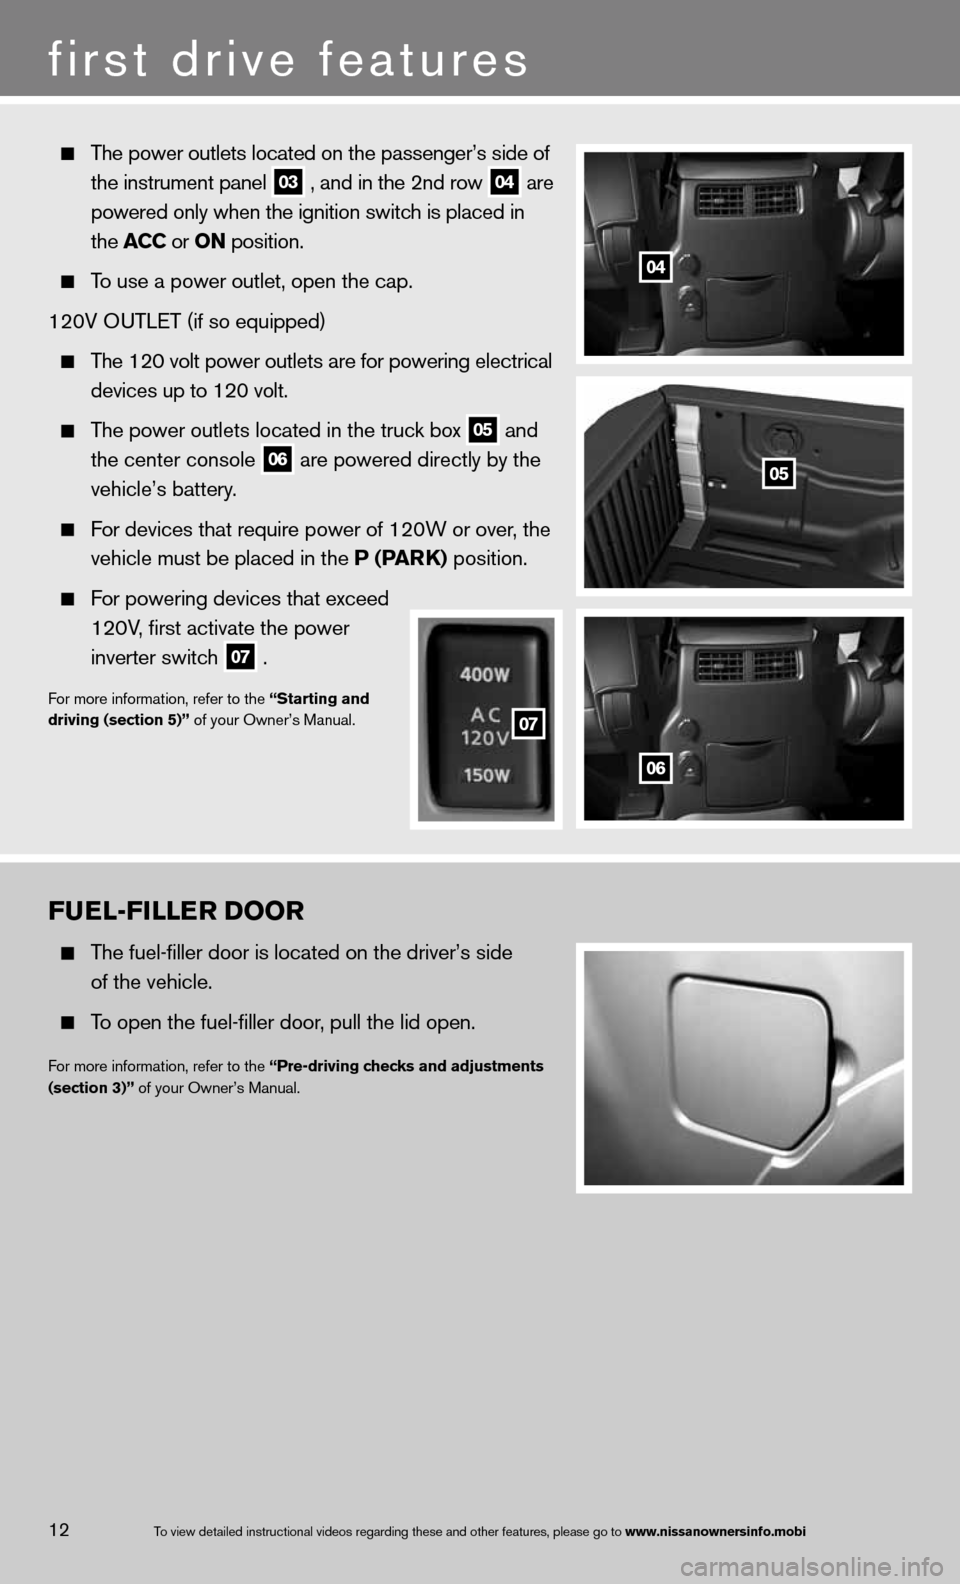 NISSAN TITAN 2013 1.G Quick Reference Guide 12To view detailed in\fstructional videos\f regarding these a\fnd other features\f \fplease go to www.nissanownersin\hfo.mobi
FUEL-FILLER DOOR
    The fuel-filler door is located on the driver’s sid